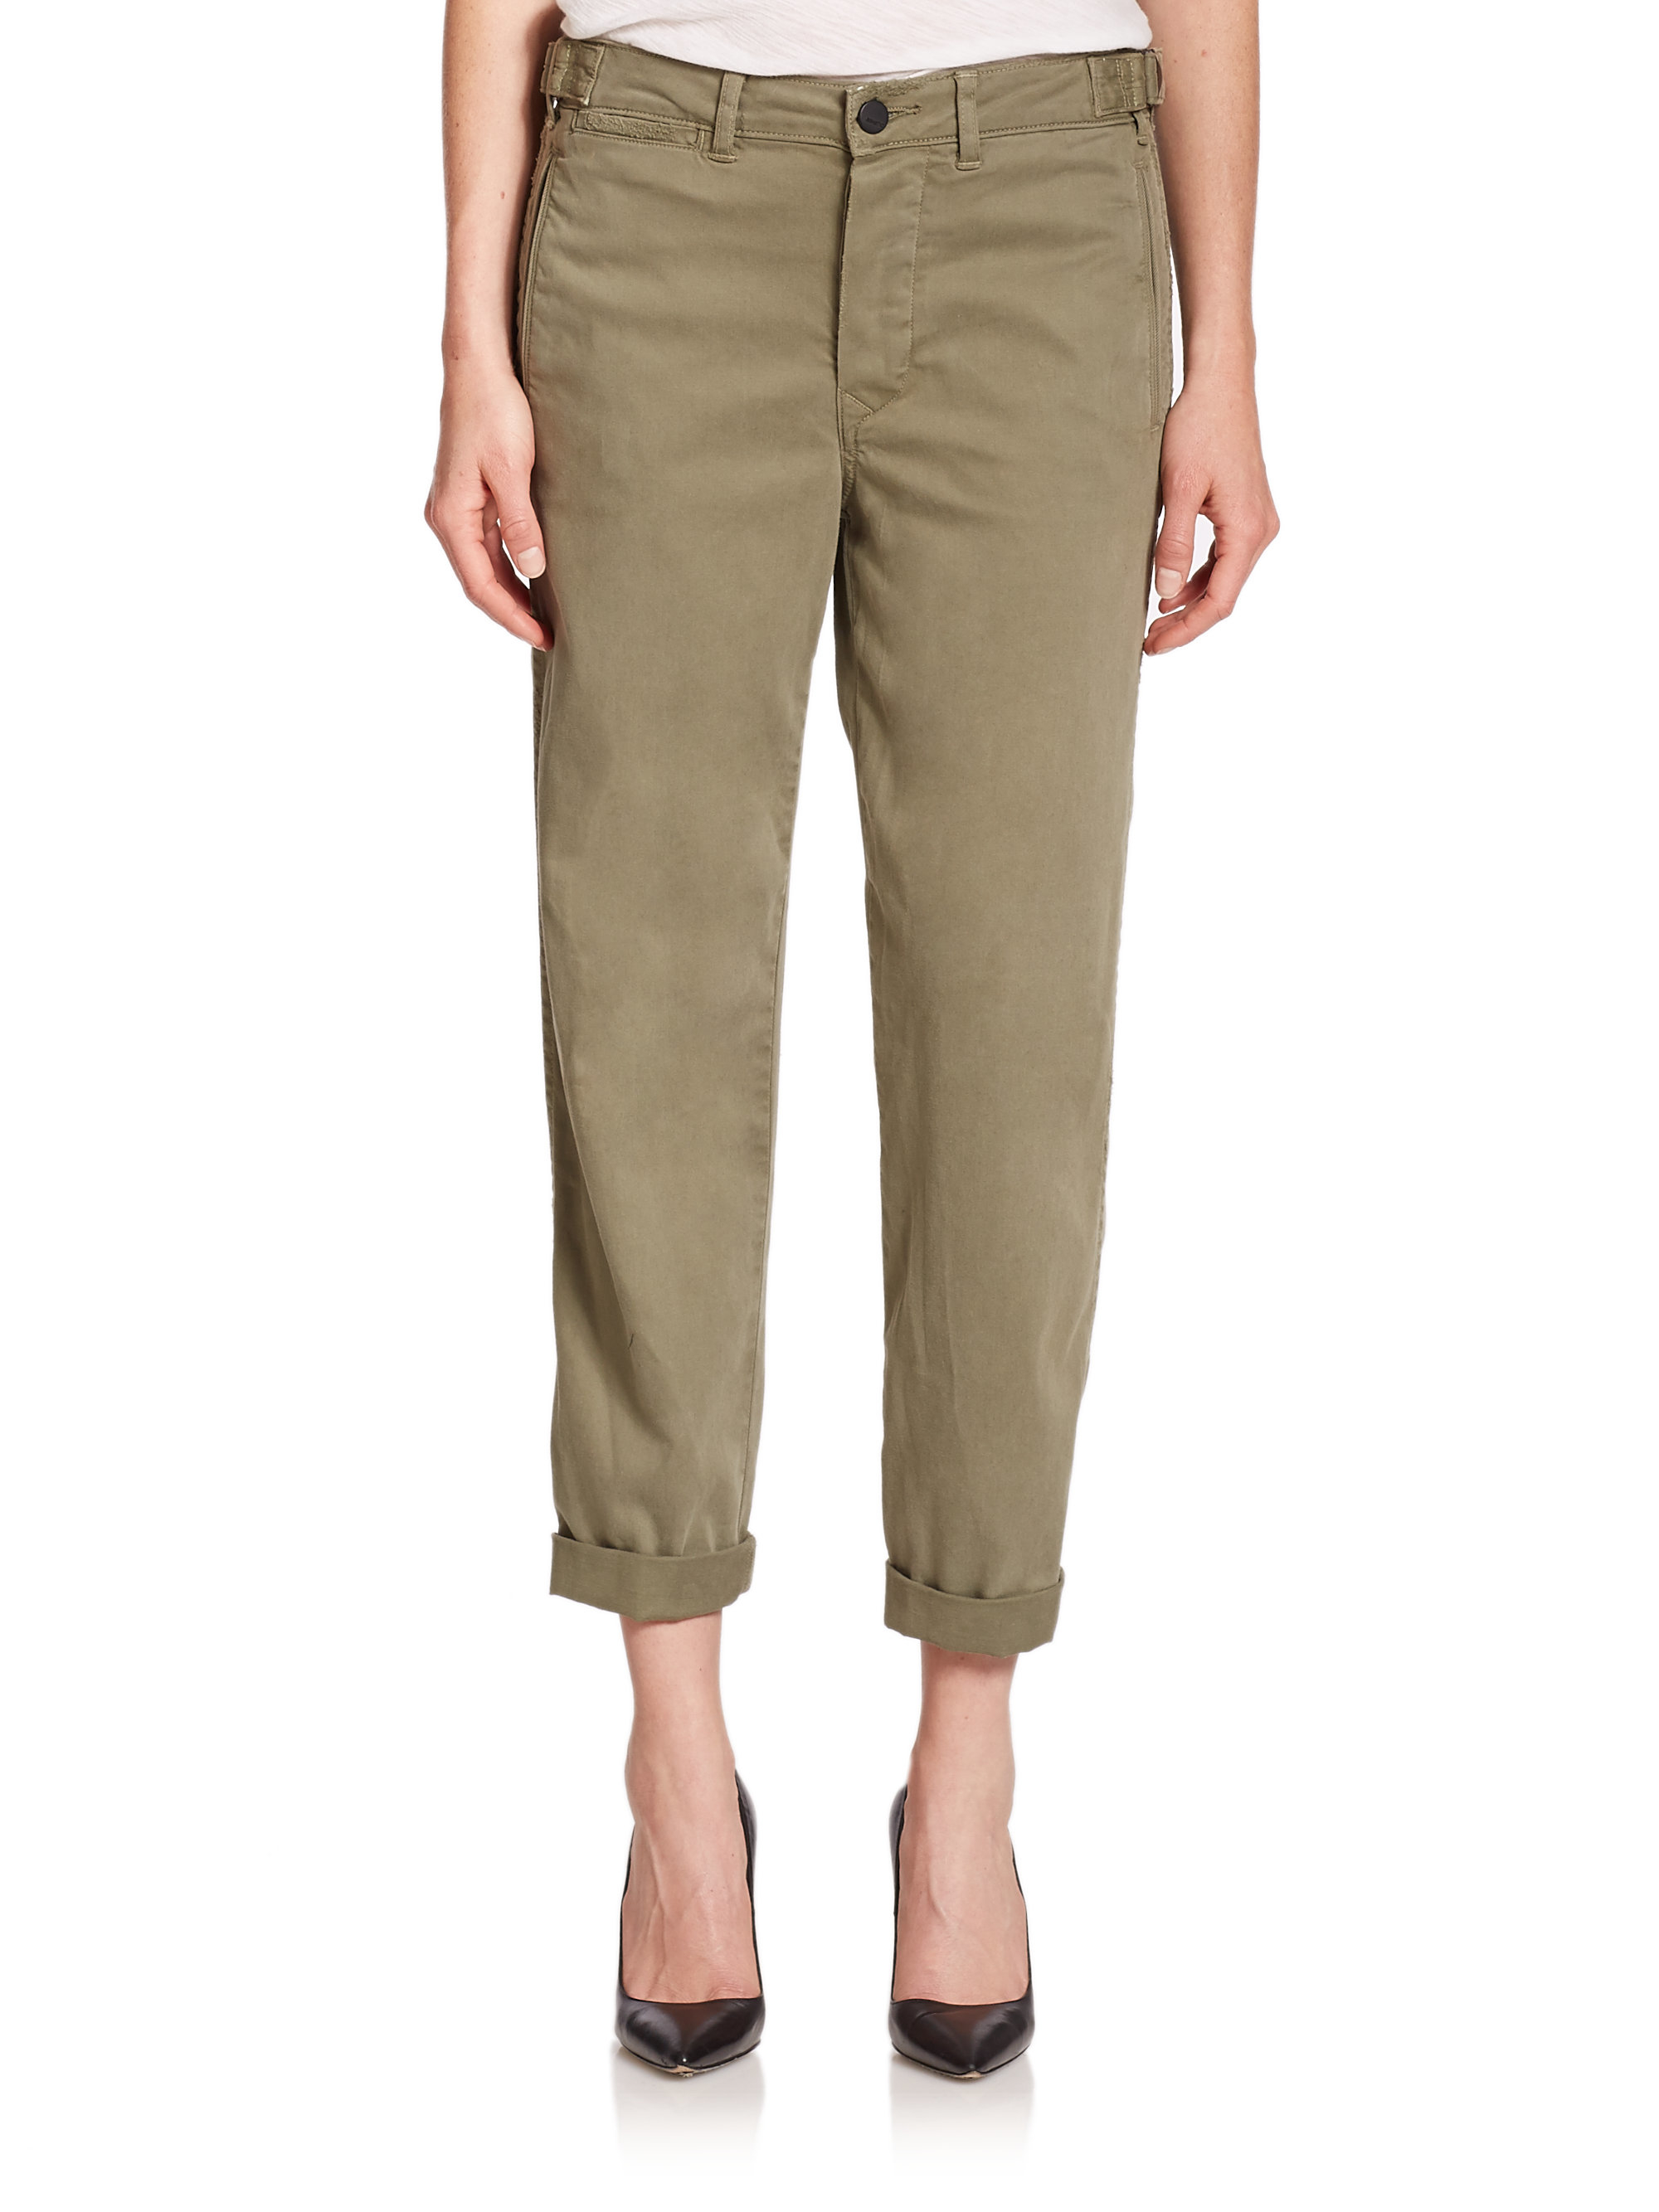 Lyst - Genetic denim Relaxed Cropped Straight-leg Jeans in Green